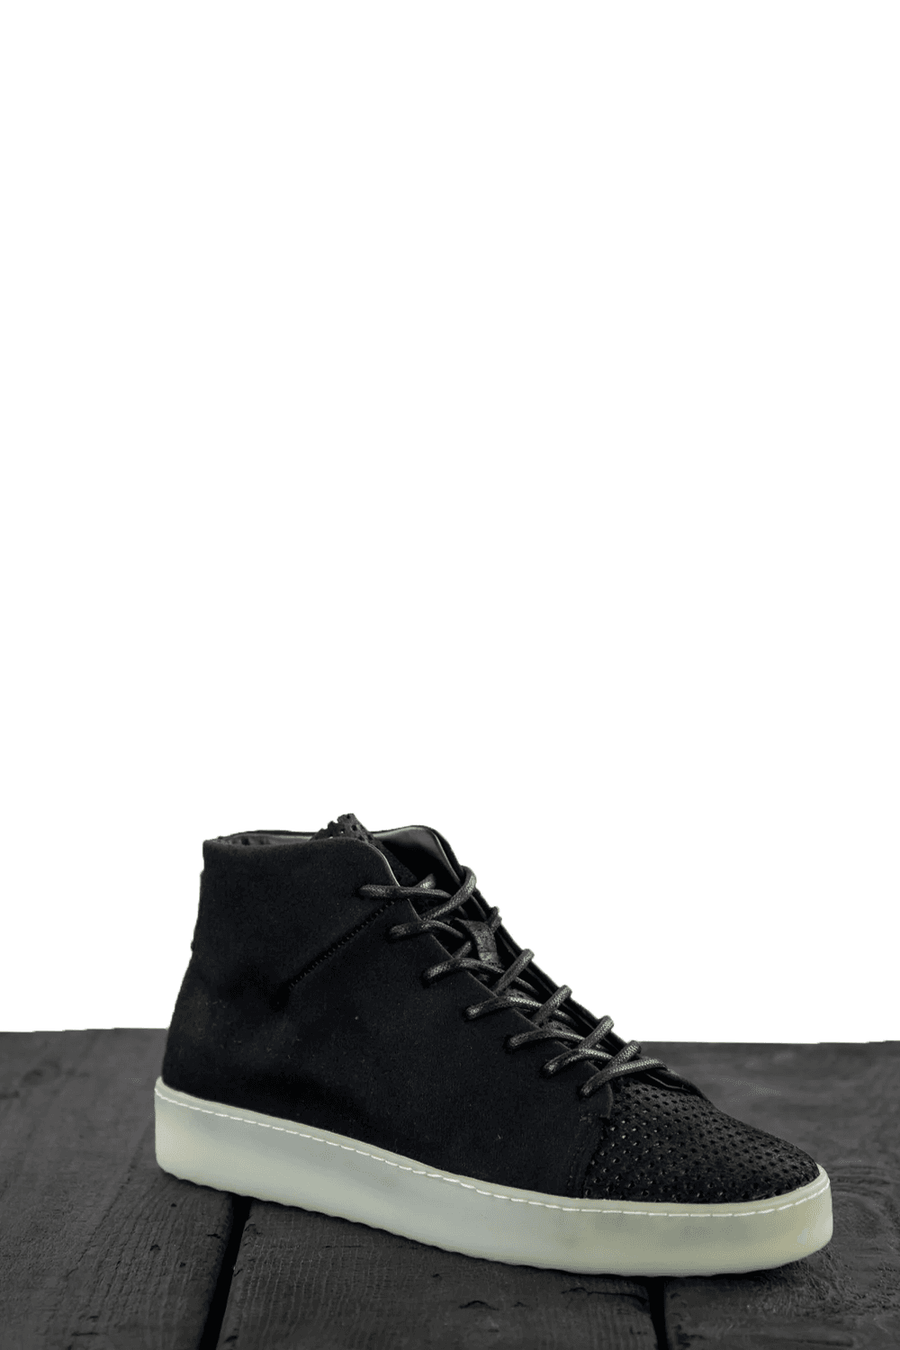 Buy the Hannes Roether Perforated Sneaker Black at Intro. Spend £50 for free UK delivery. Official stockists. We ship worldwide.